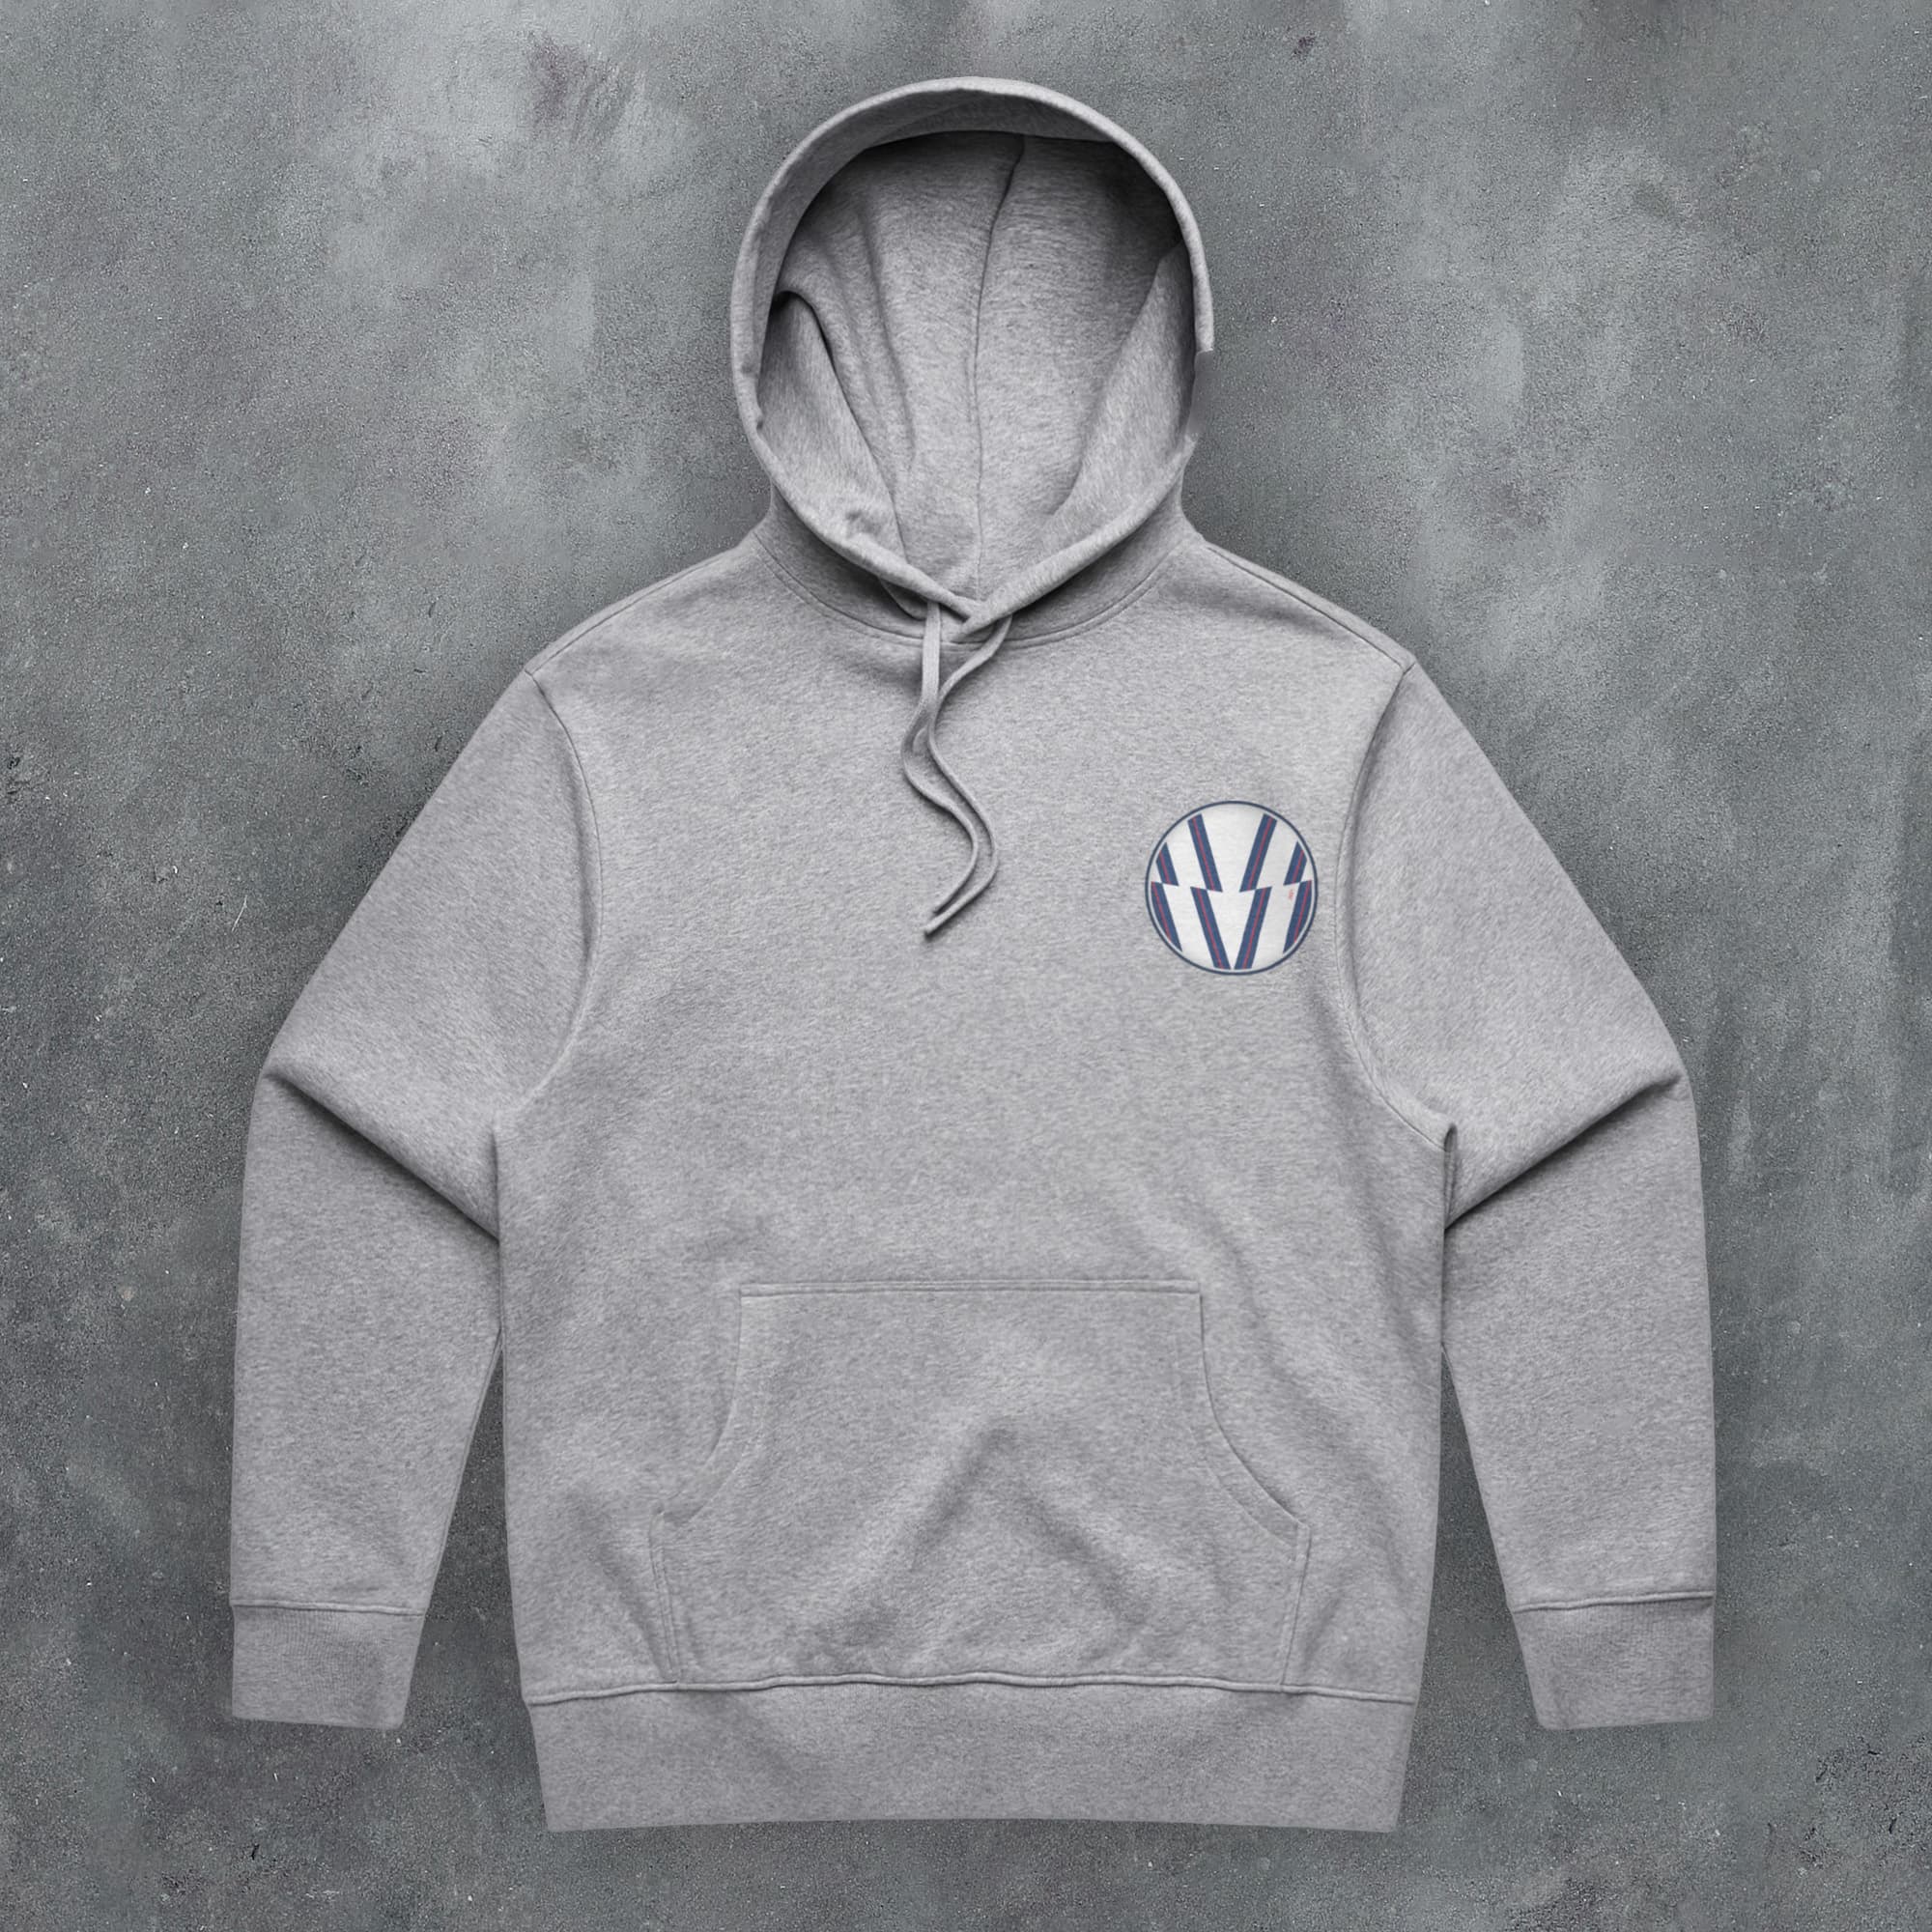 a grey hoodie with a blue and white striped logo